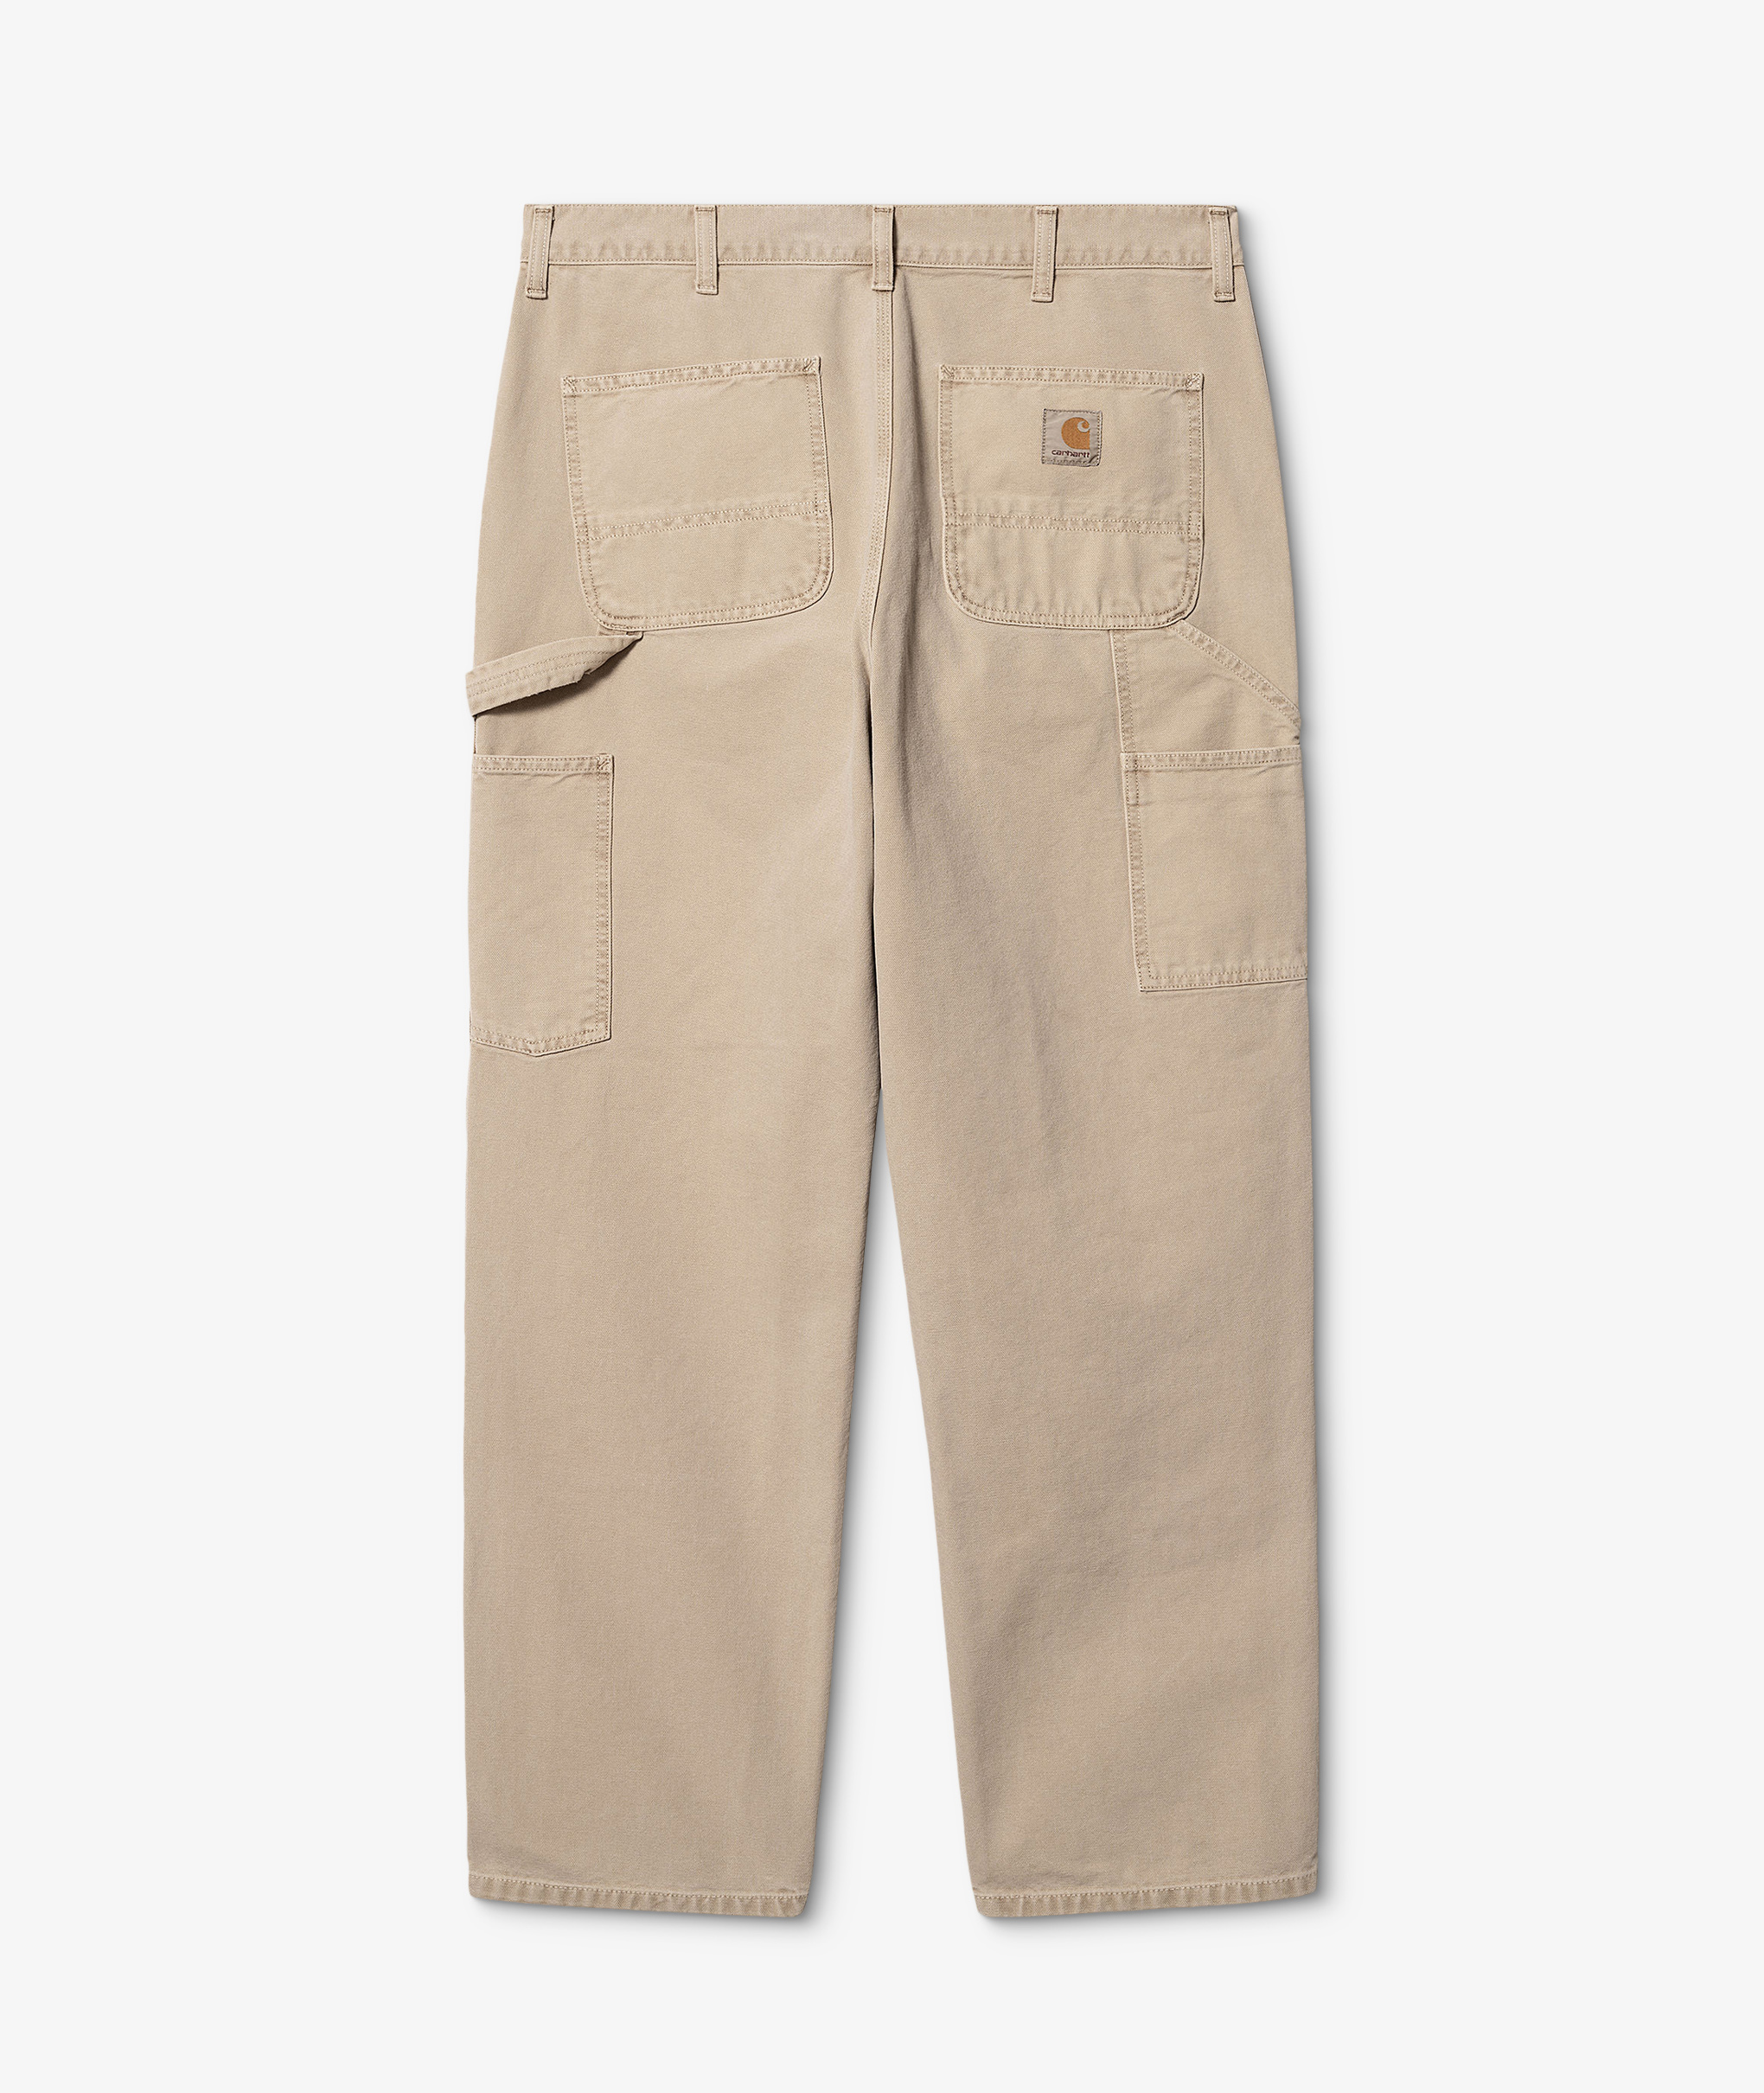 Norse Store | Shipping Worldwide - Carhartt WIP Double Knee Pant